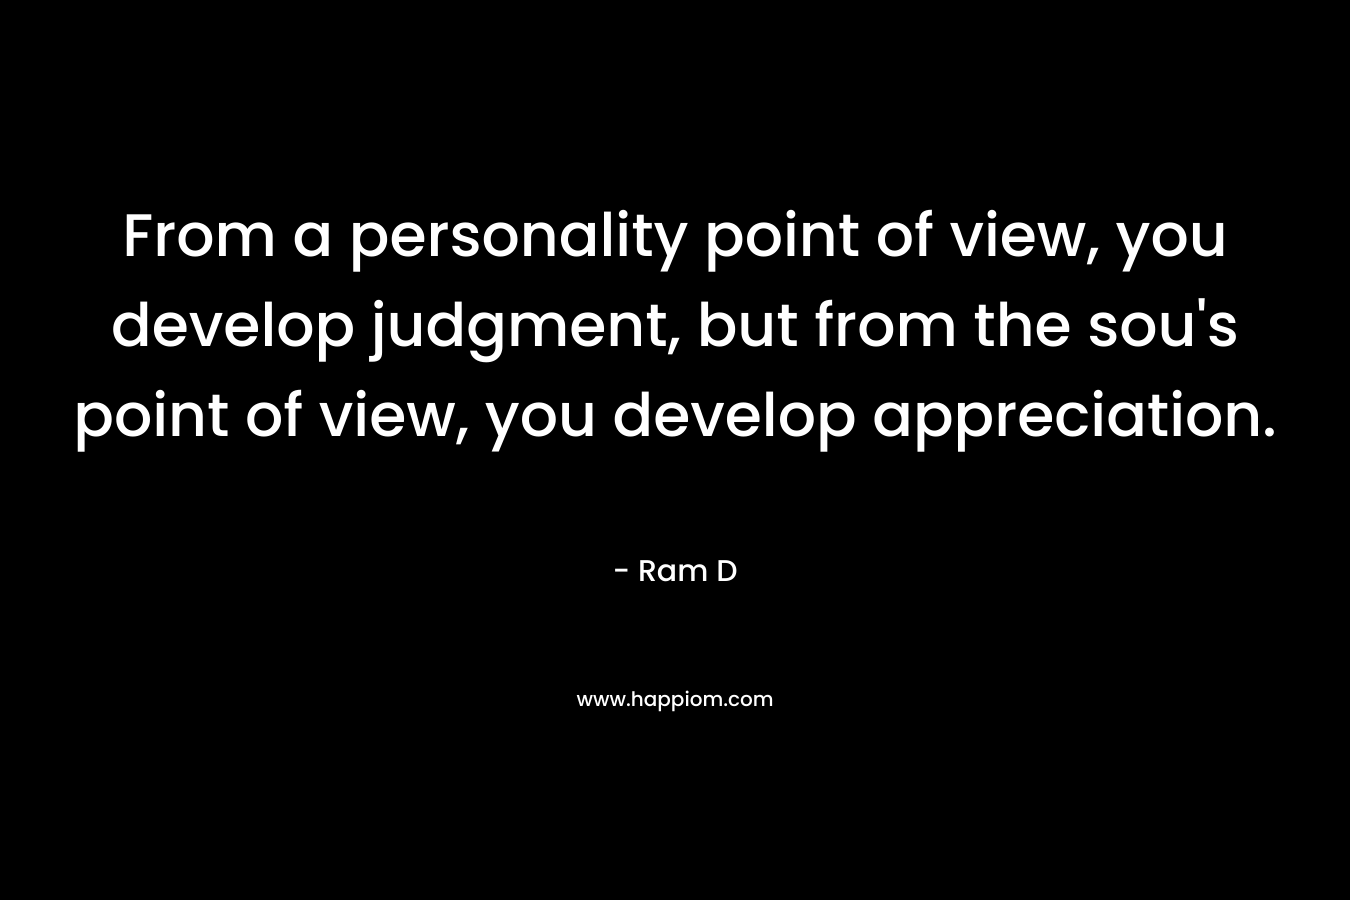 From a personality point of view, you develop judgment, but from the sou’s point of view, you develop appreciation. – Ram D